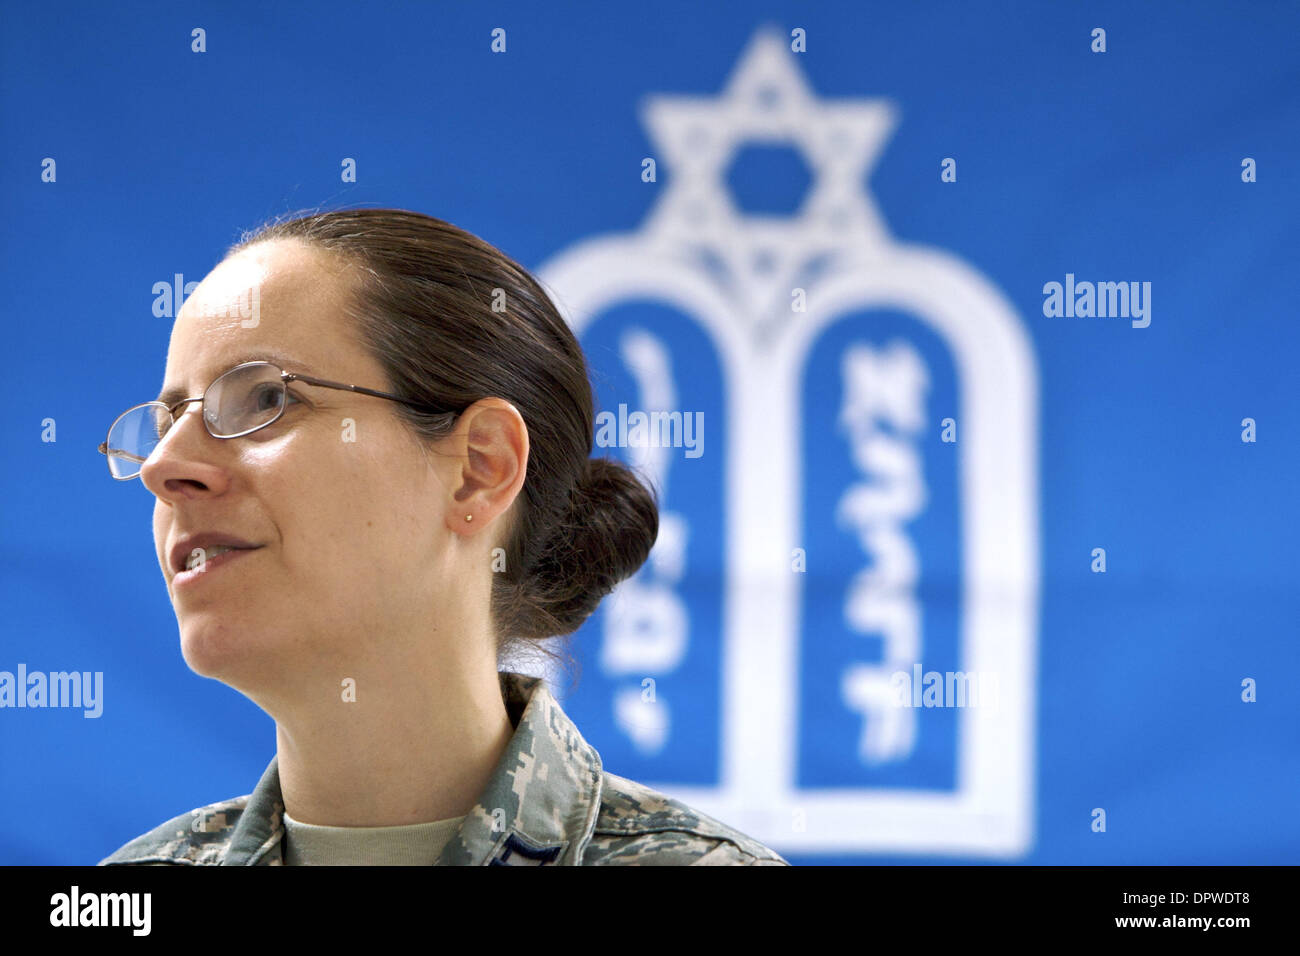 Feb 28, 2009 - Baghdad, Iraq - United States Airforce chaplain Captain SARAH SCHECHTER greets people during a Jewish Shabbat service on Joint Base Balad in Iraq.  Captain Schechter currently is the only Rabbinical chaplain serving in Iraq. (Credit Image: © John Goodman/ZUMA Press) Stock Photo